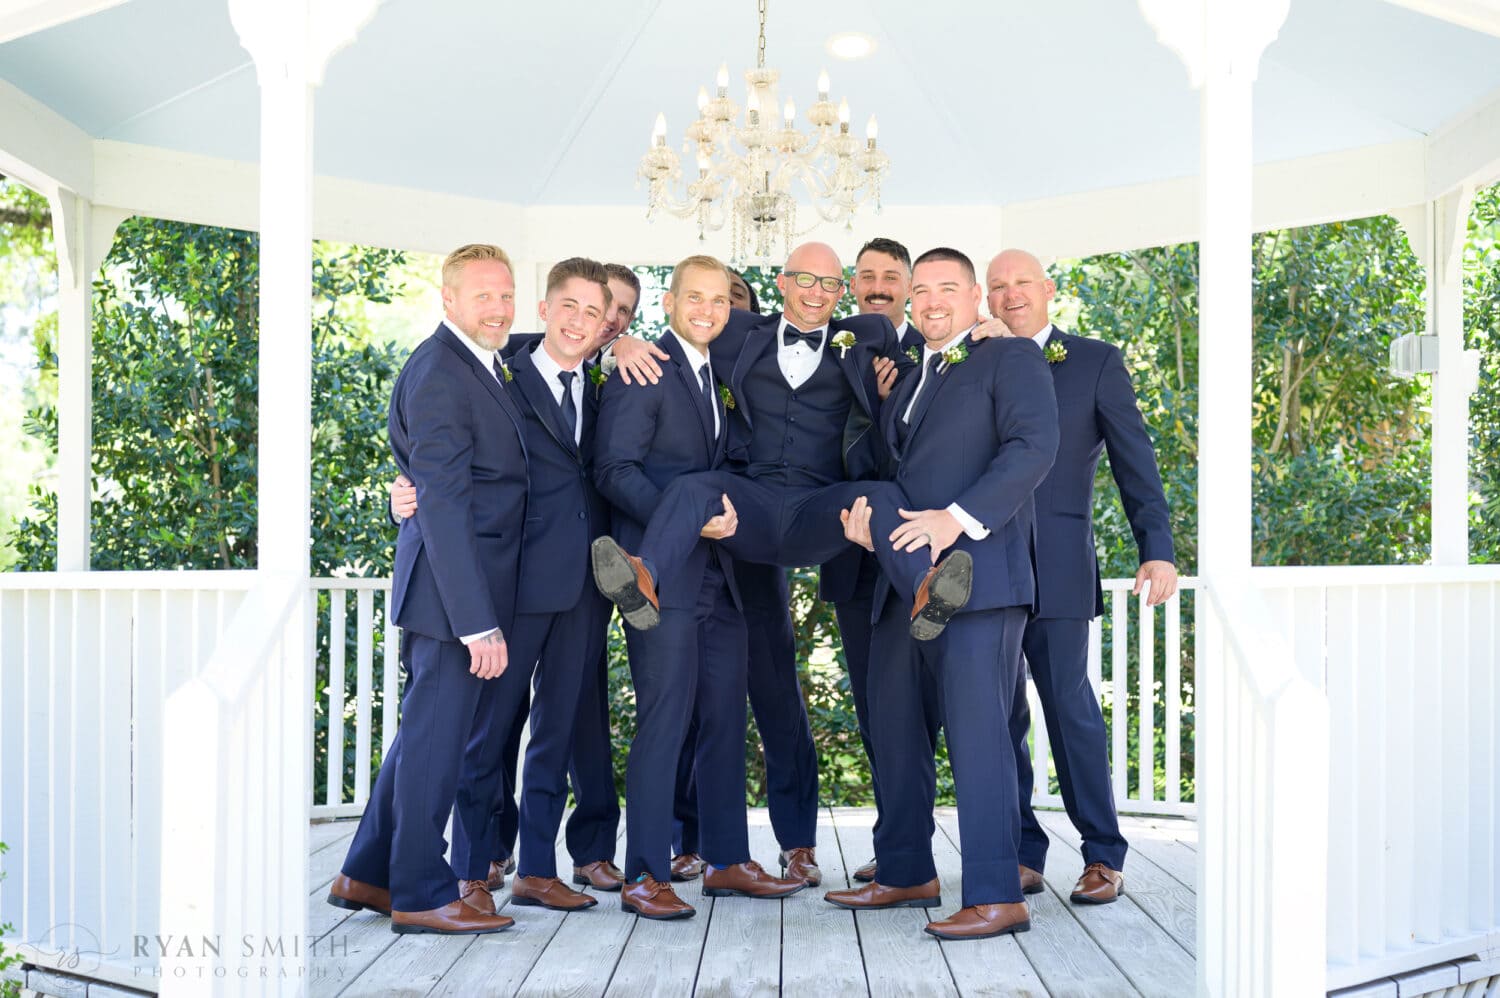 Groomsmen picking up the groom - The Village House at Litchfield